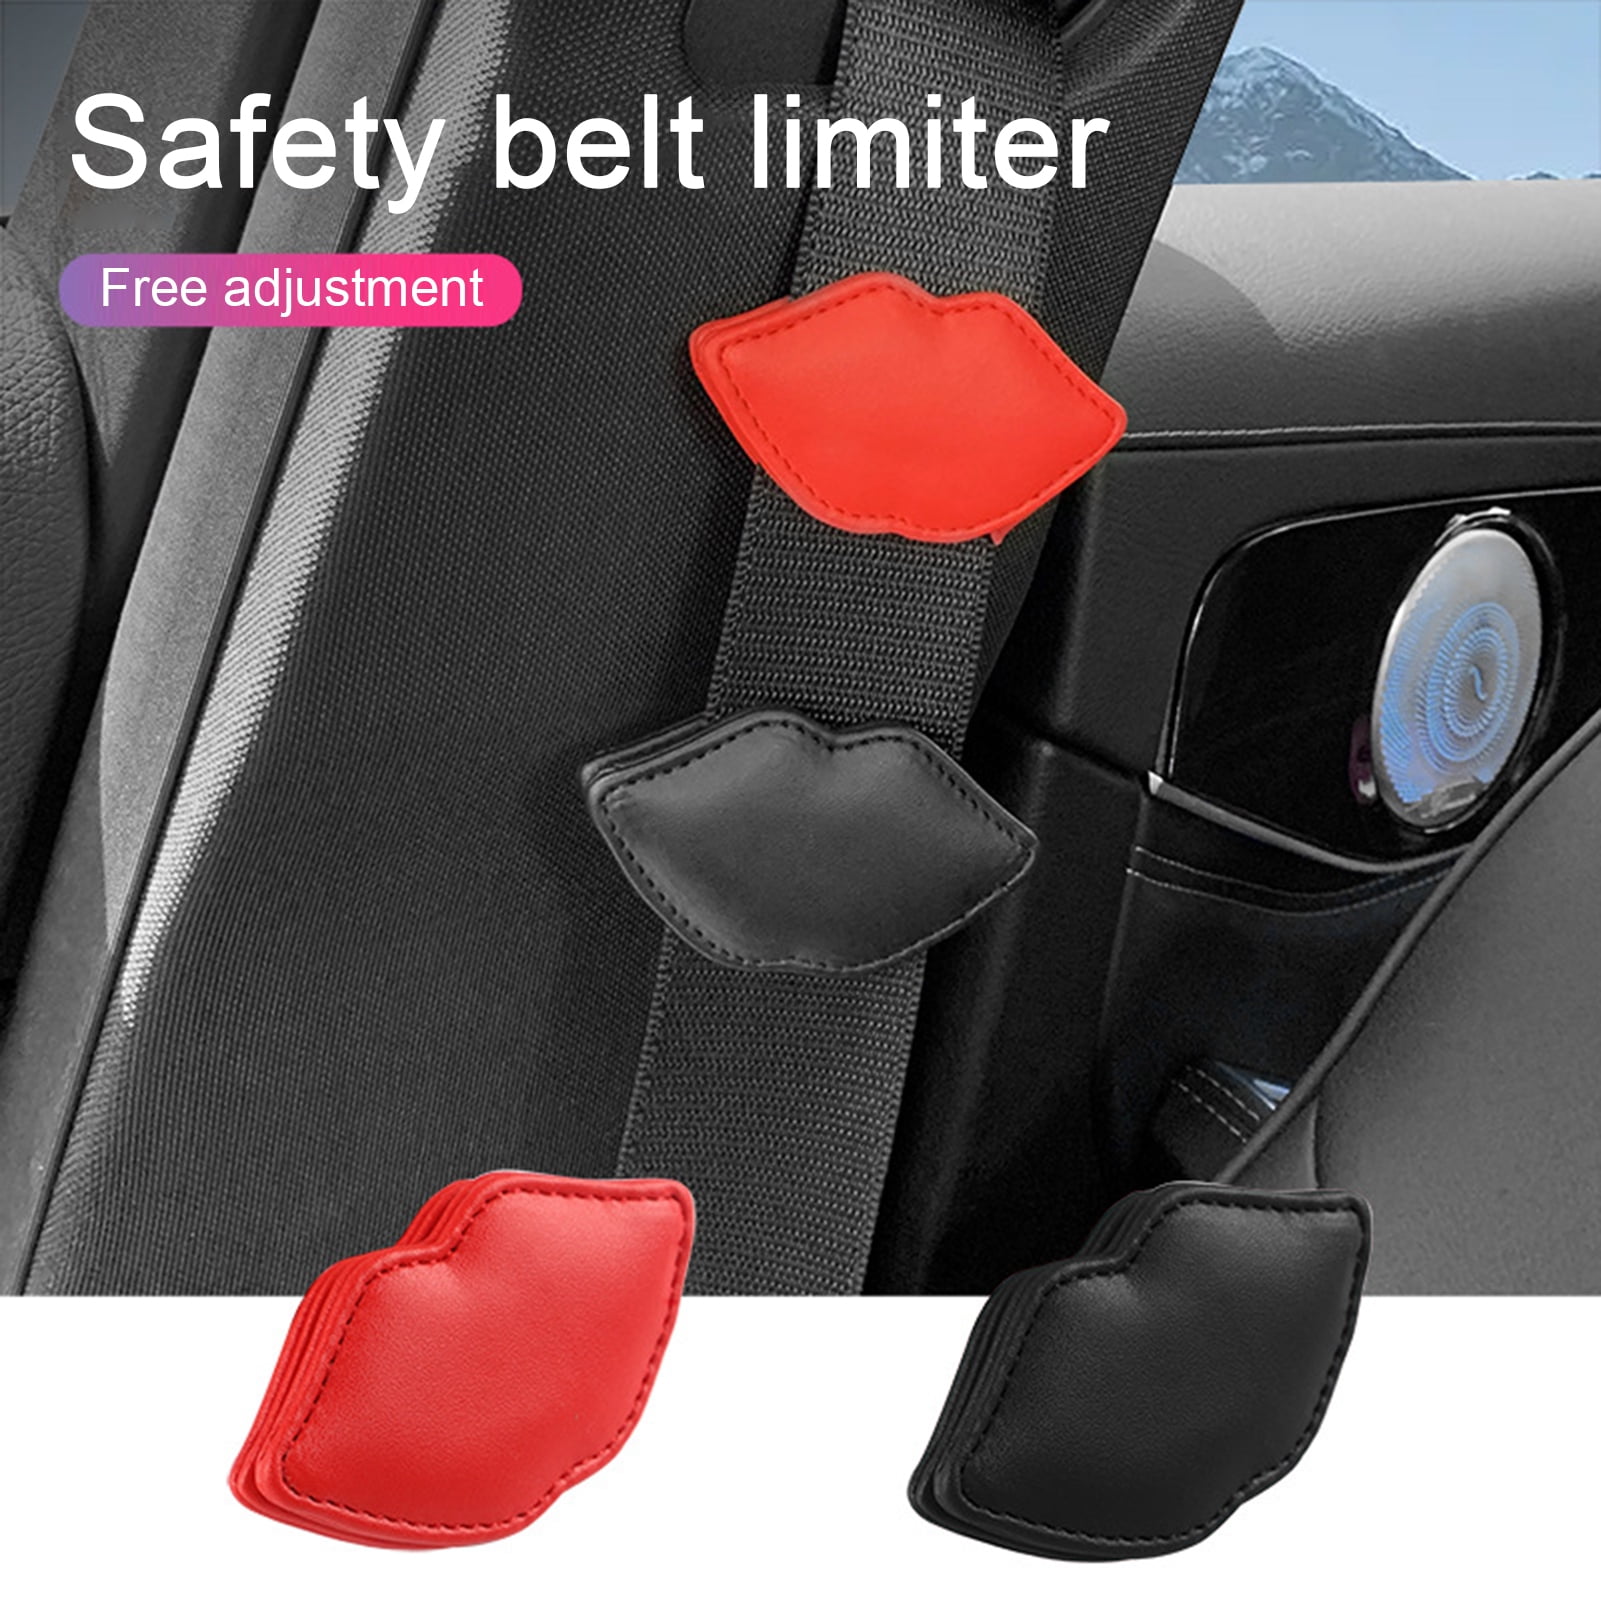 Wholesale seat belt stopper clip For A Secure And Comfortable